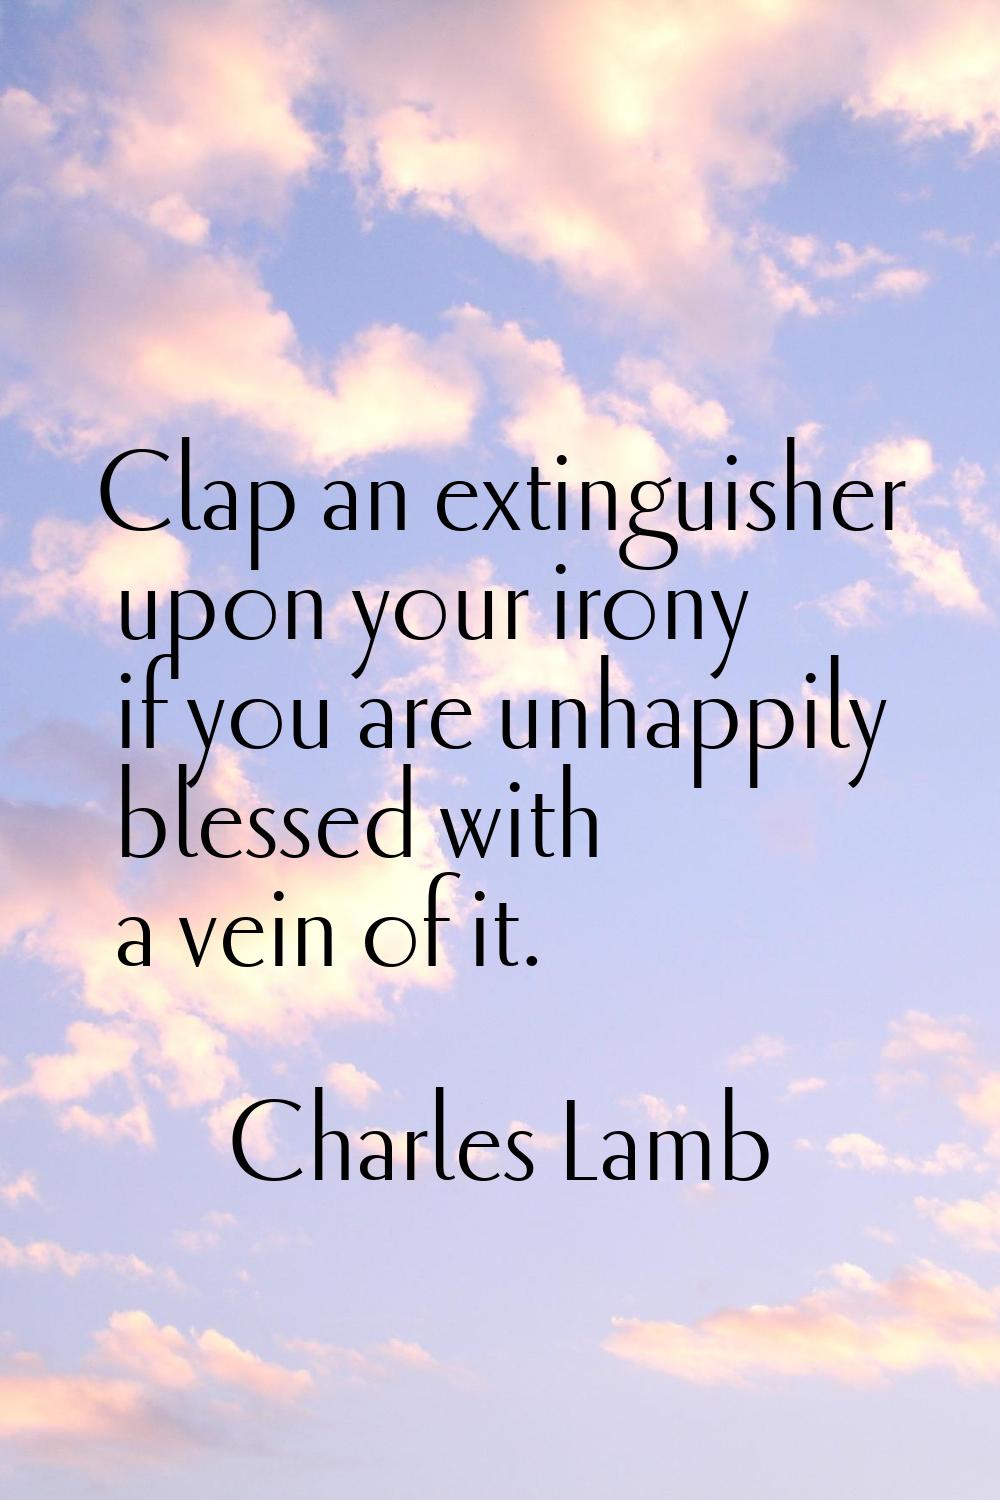 Clap an extinguisher upon your irony if you are unhappily blessed with a vein of it.